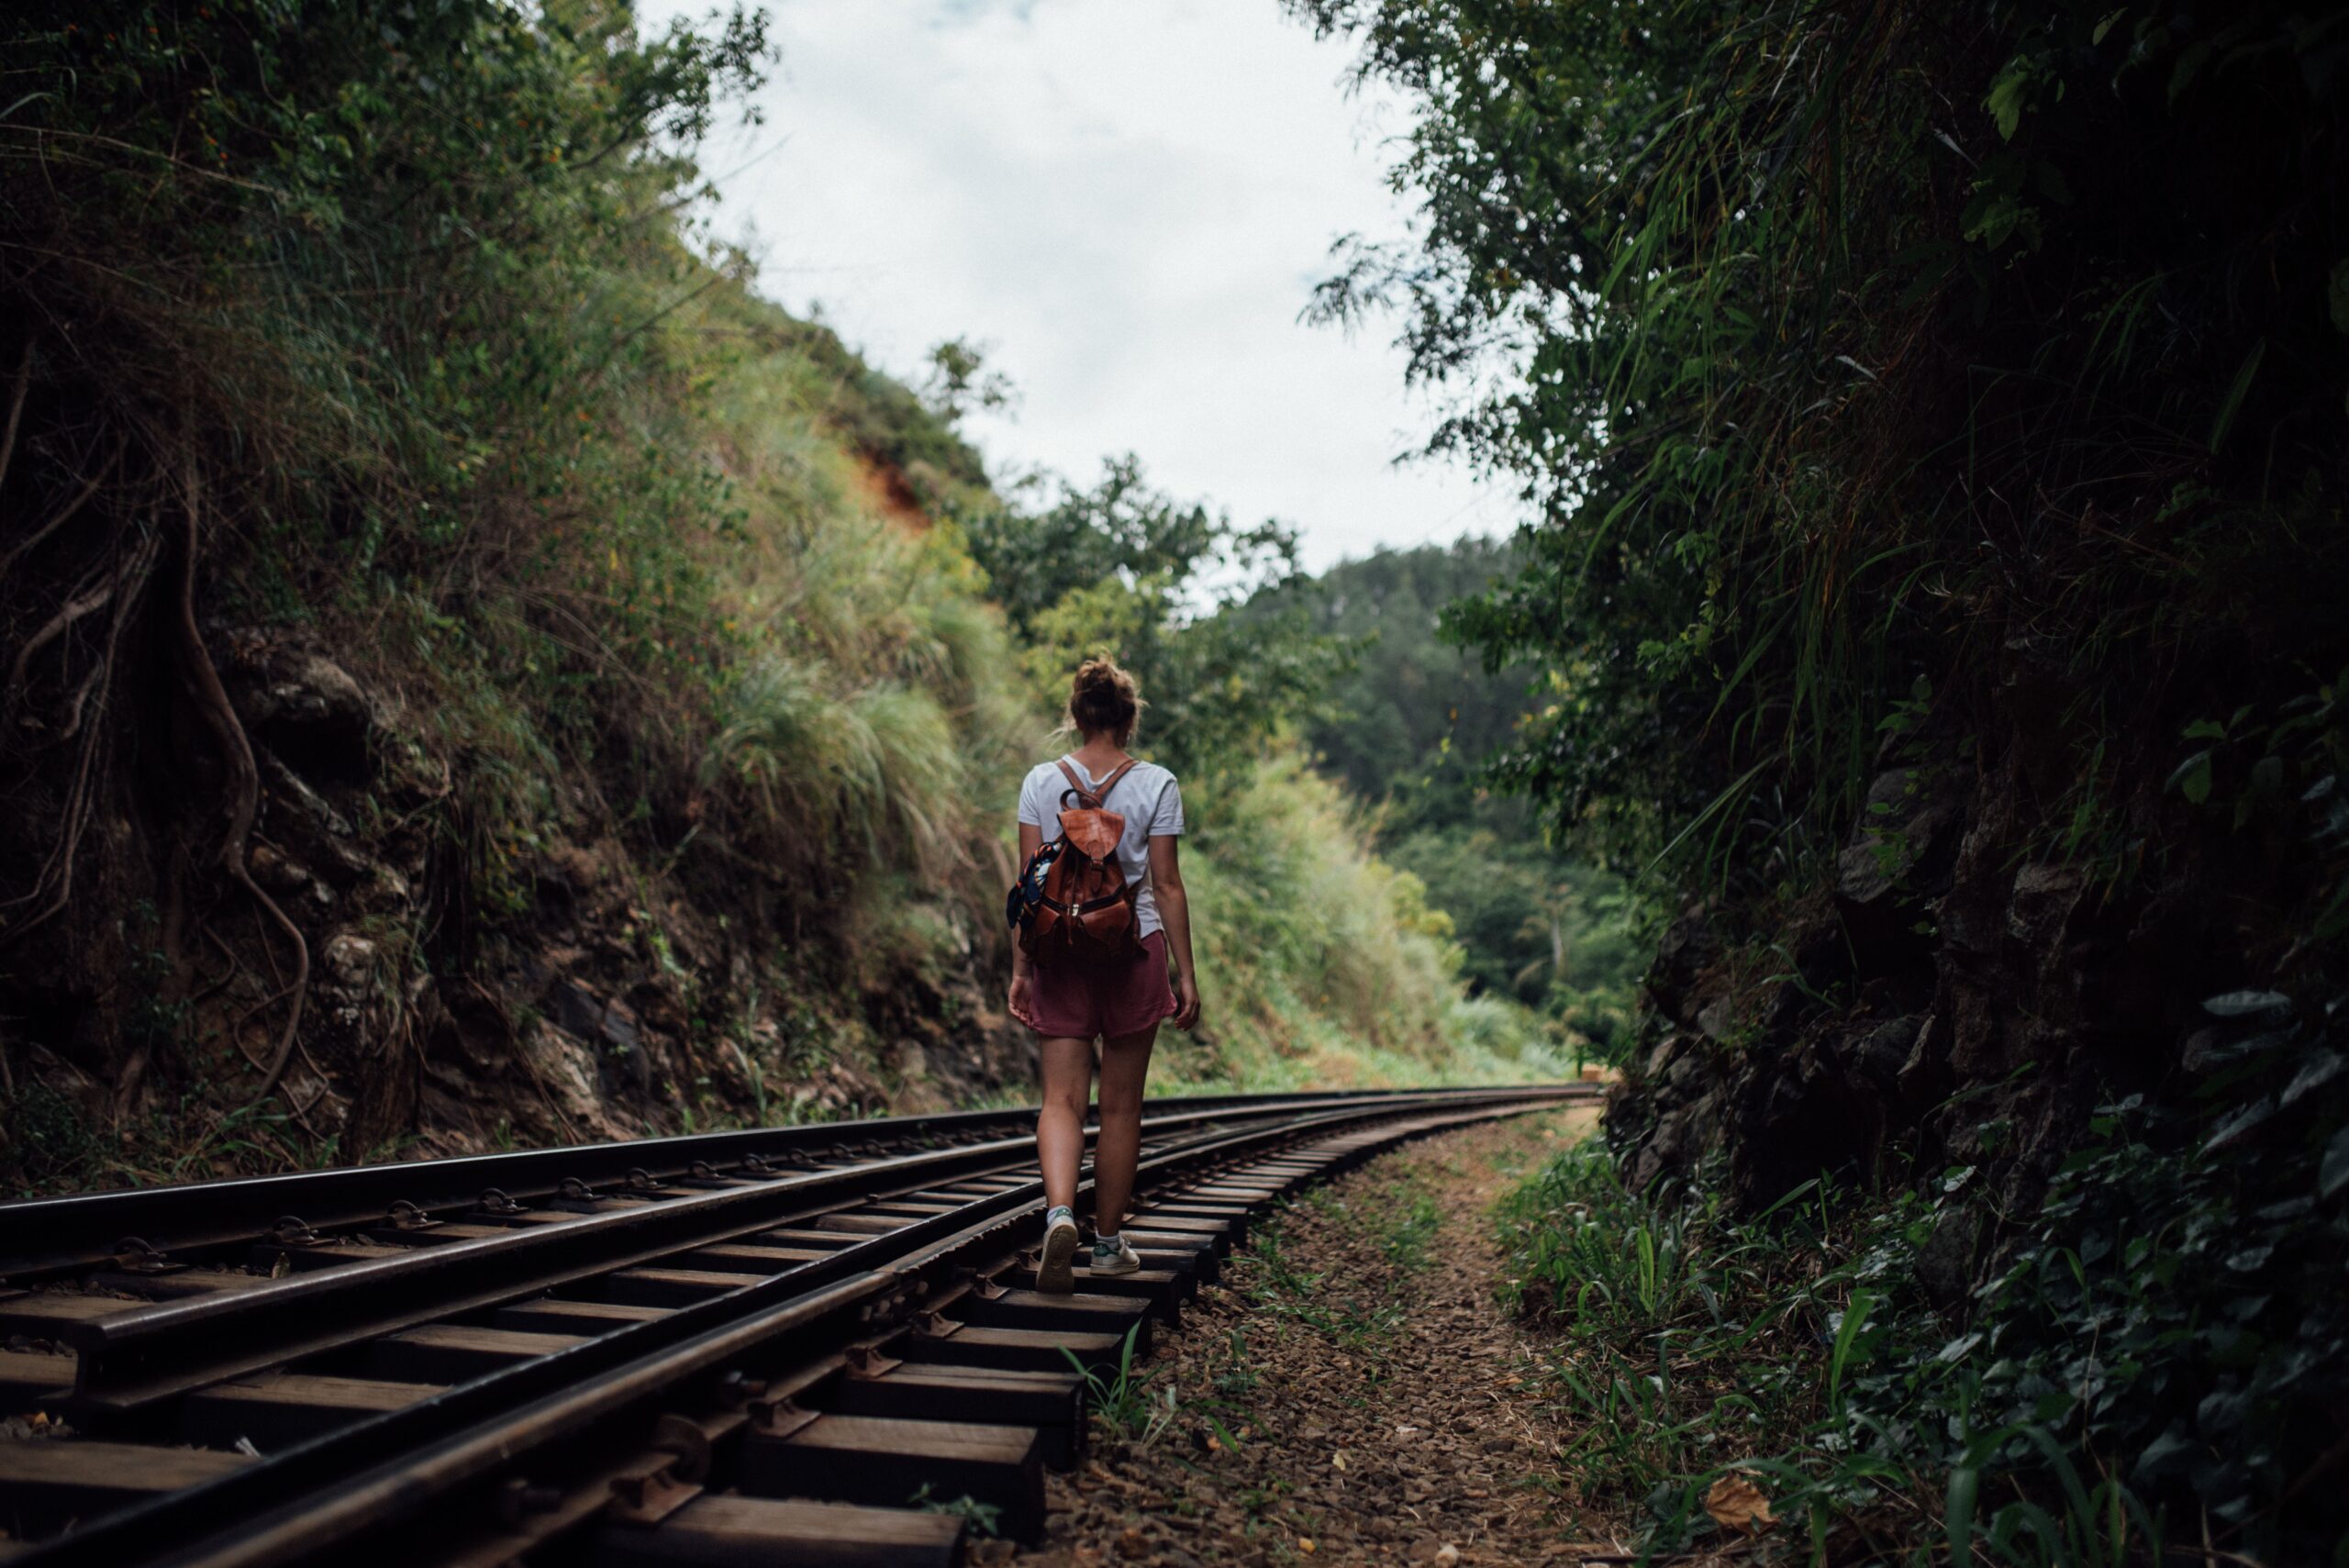 Young woman walking away down a country rail line